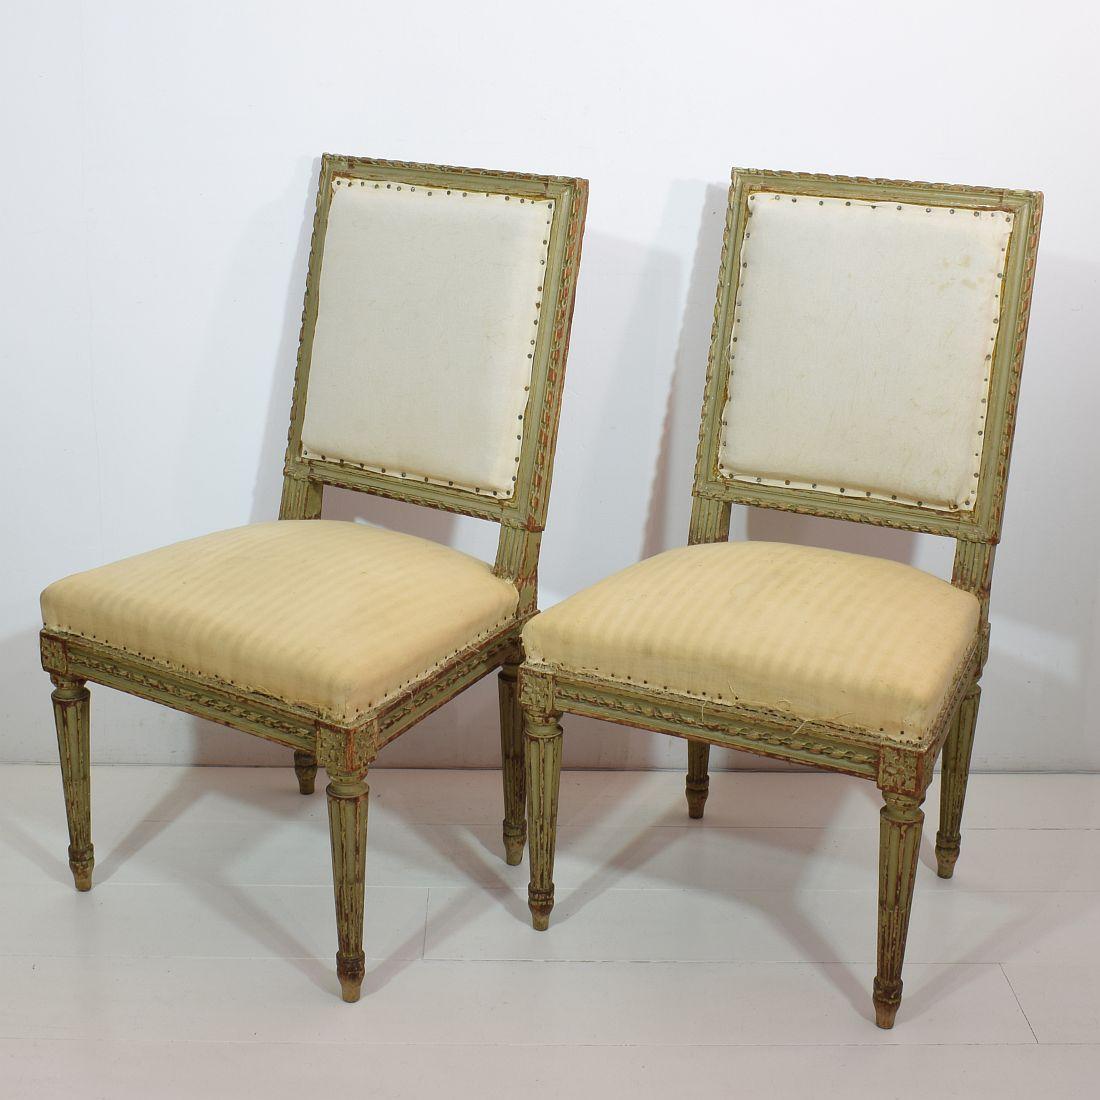 Pair of 19th Century French Painted Louis XVI Style Side Chairs (Louis XVI.)